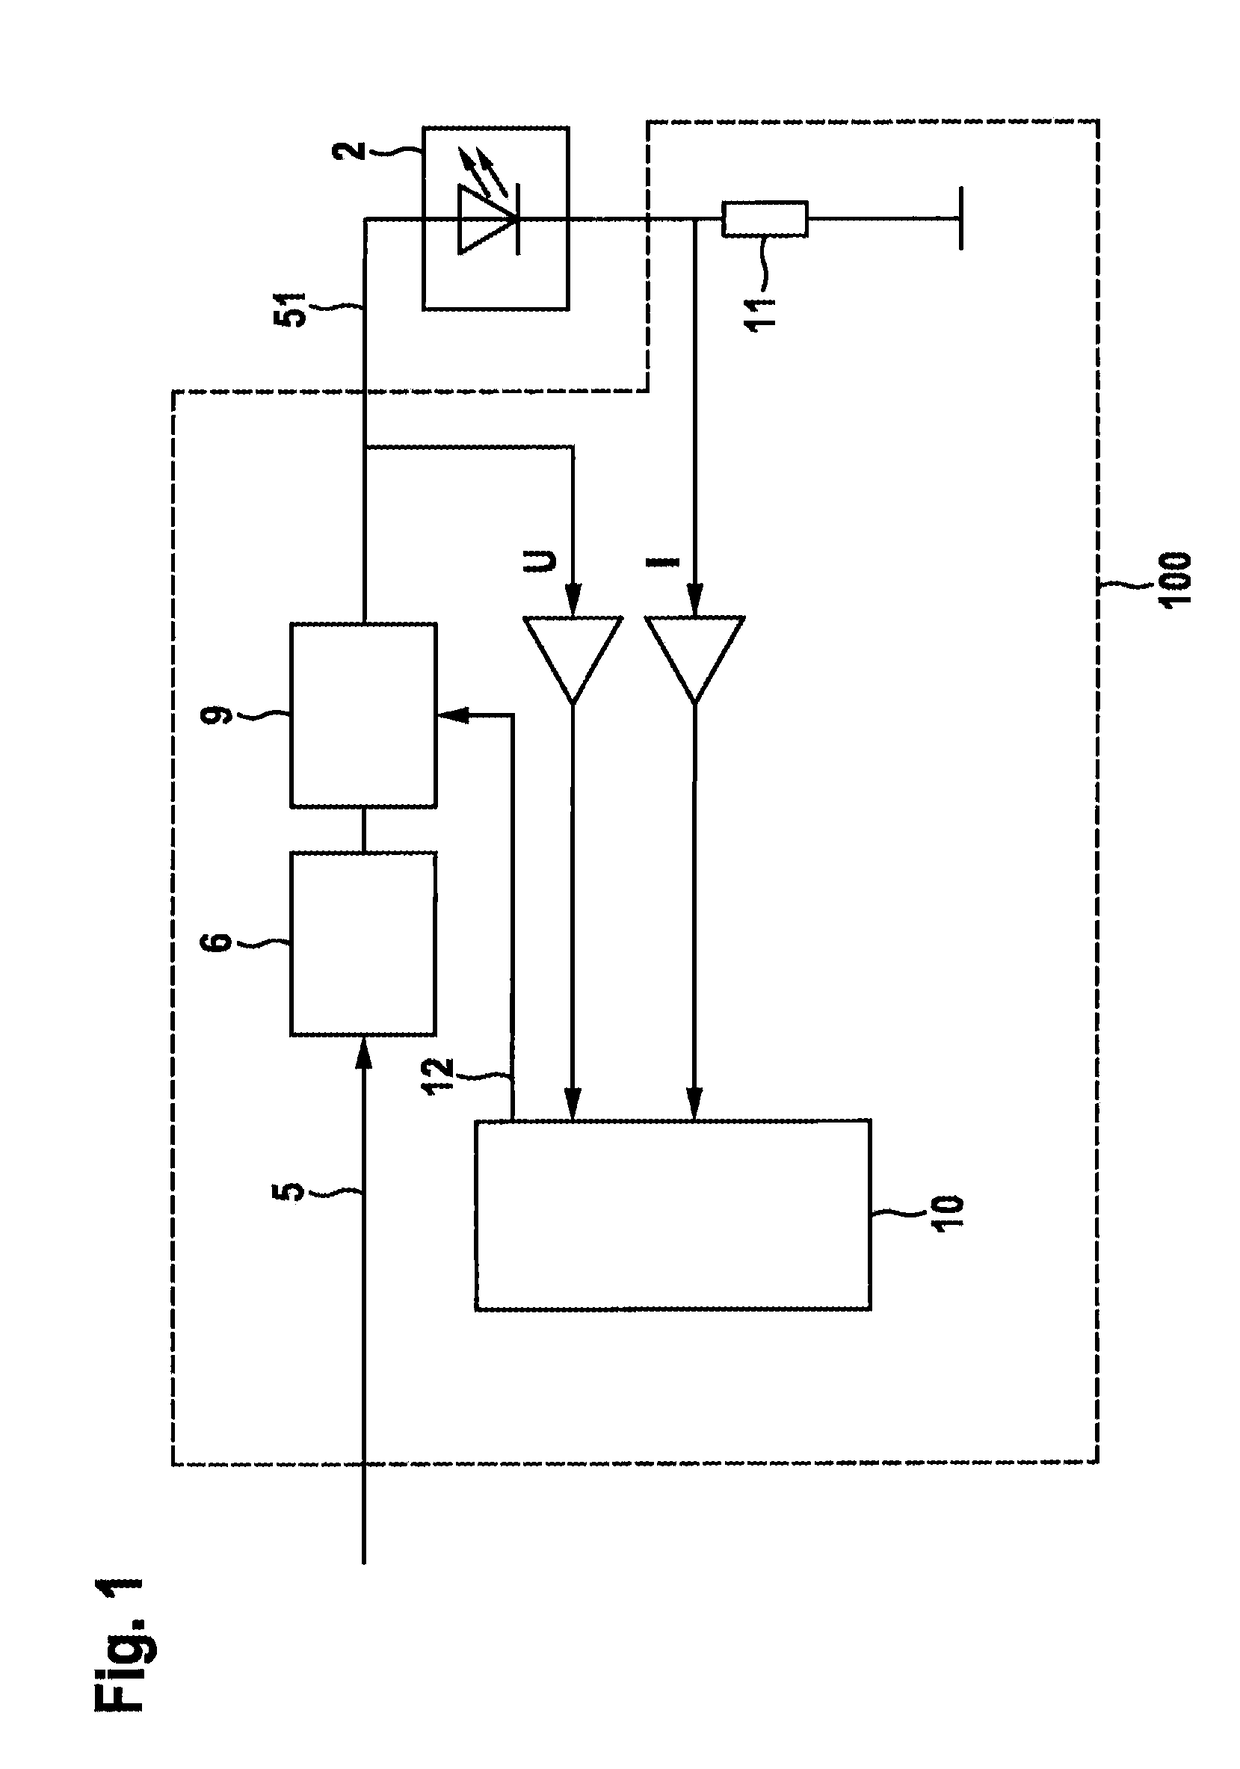 Circuit for producing a laser diode control signal